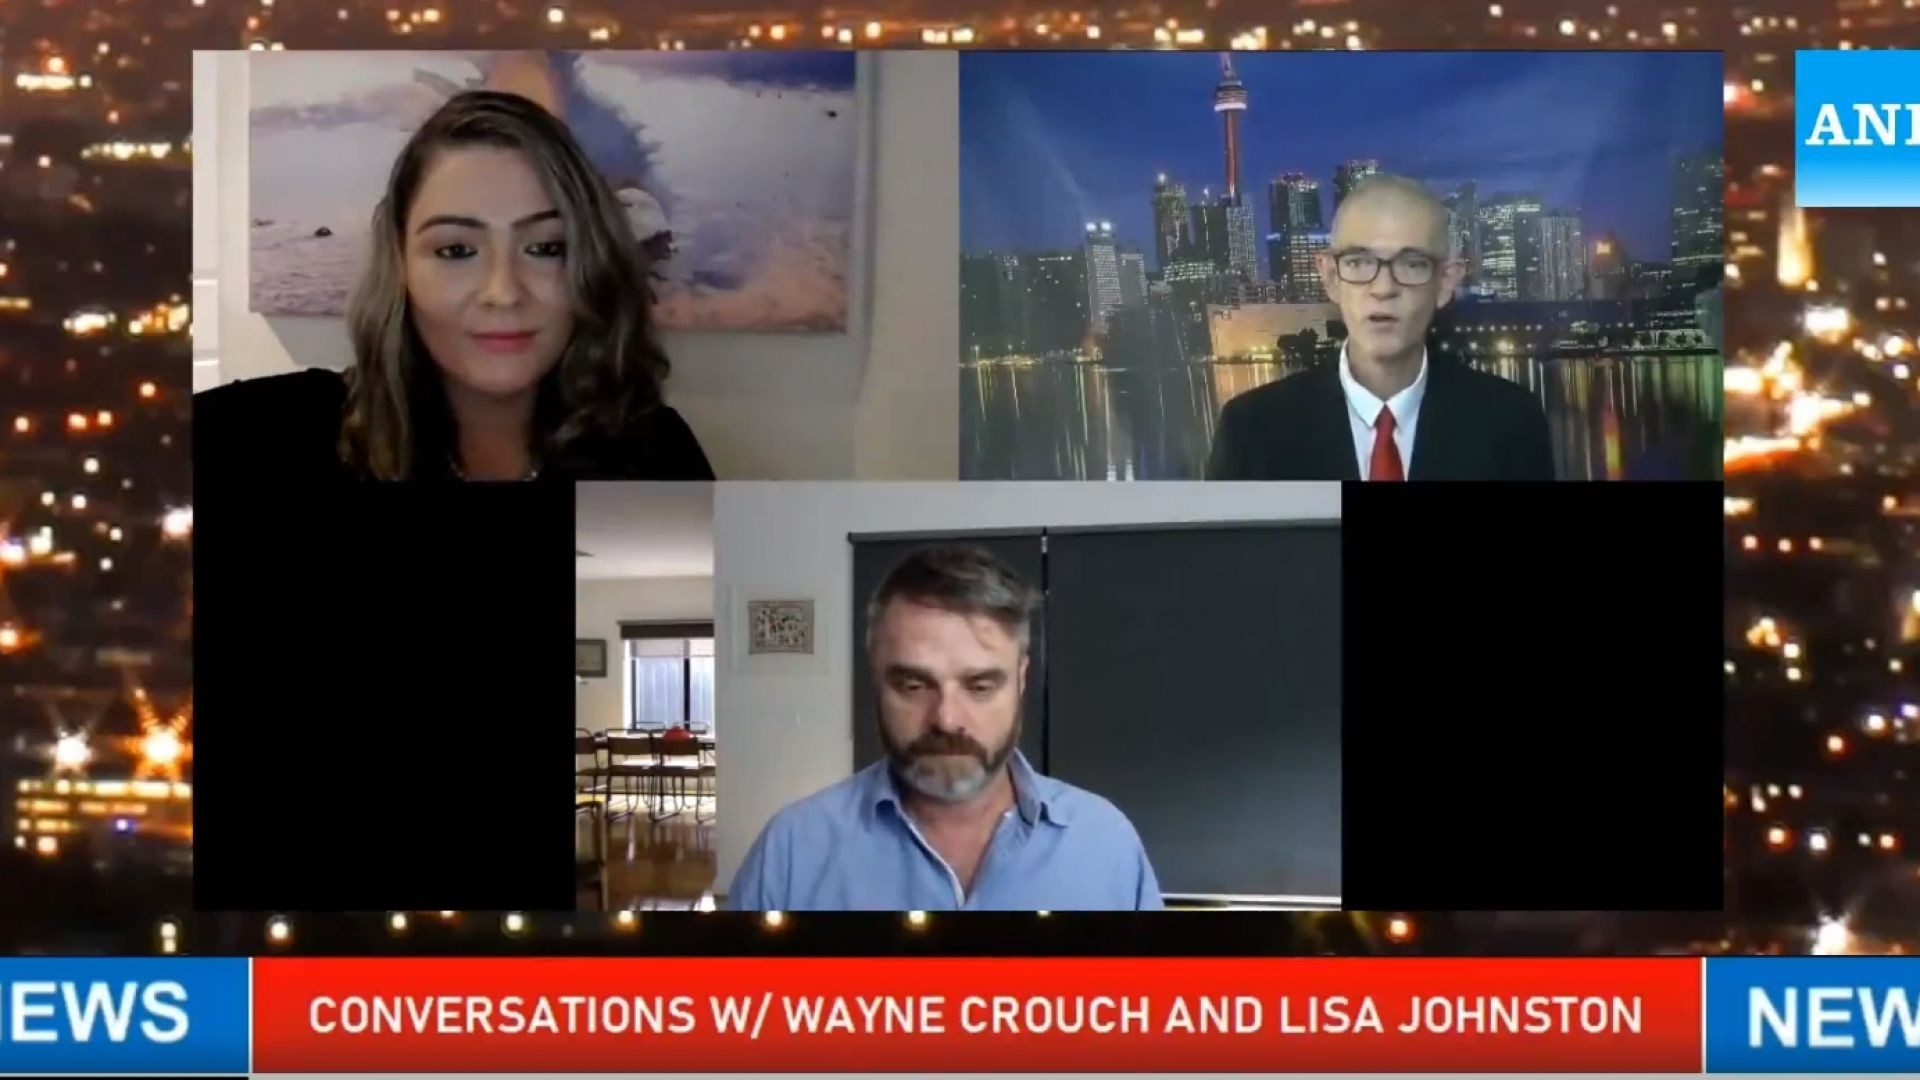 ⁣ANR Conversations With Wayne Crouch And Lisa Johnston Mass Media Mind Control